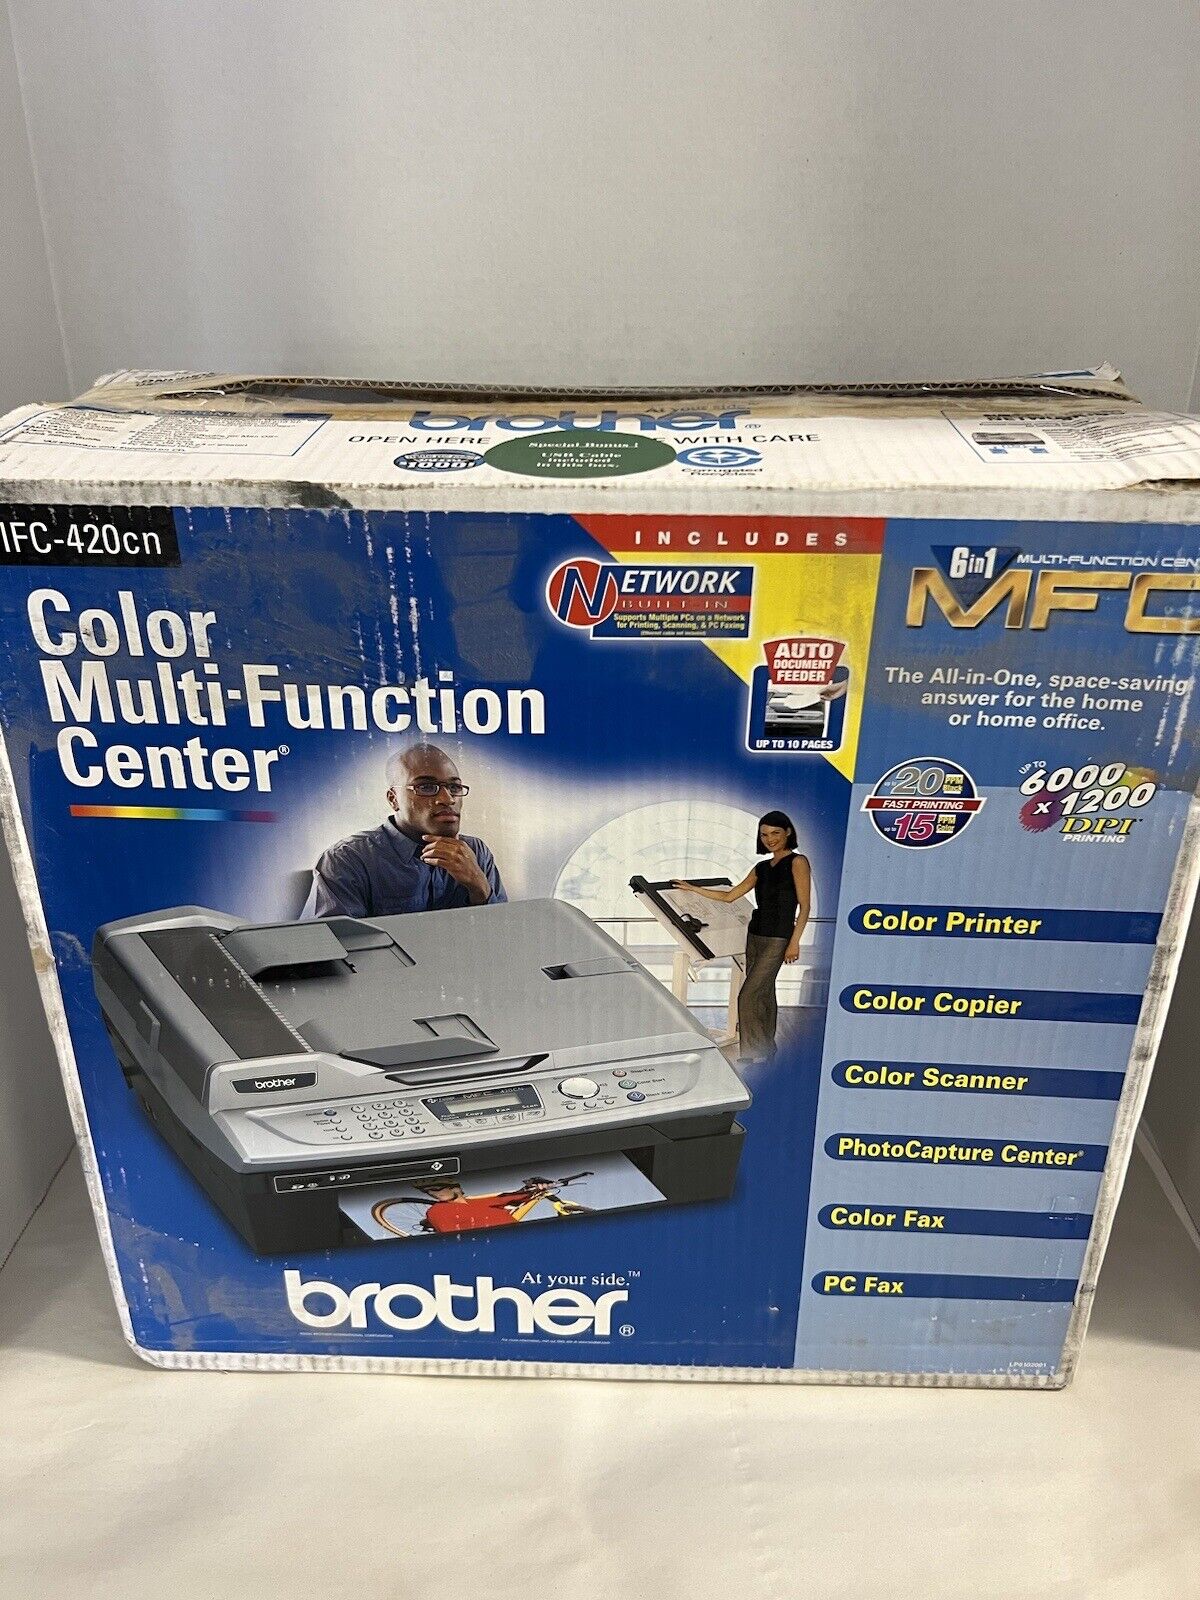 Brother Printer Color Multi-Function Center MFC-420cn